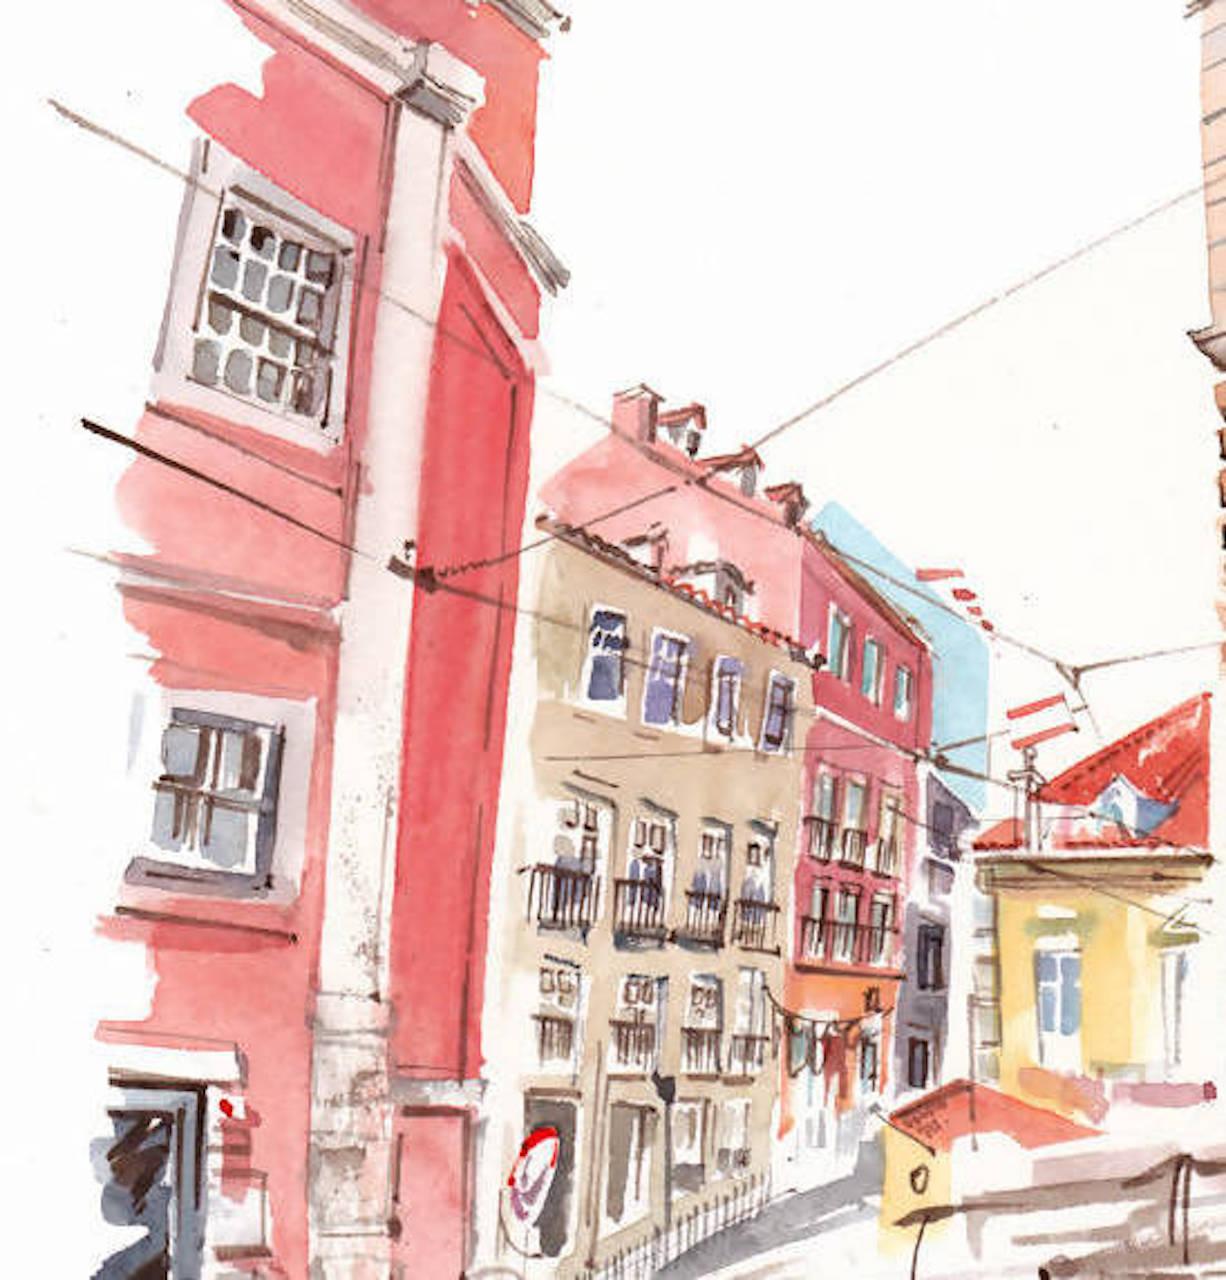 Gary Wing, Lisbon Street, Original Architectural Painting, Affordable Art